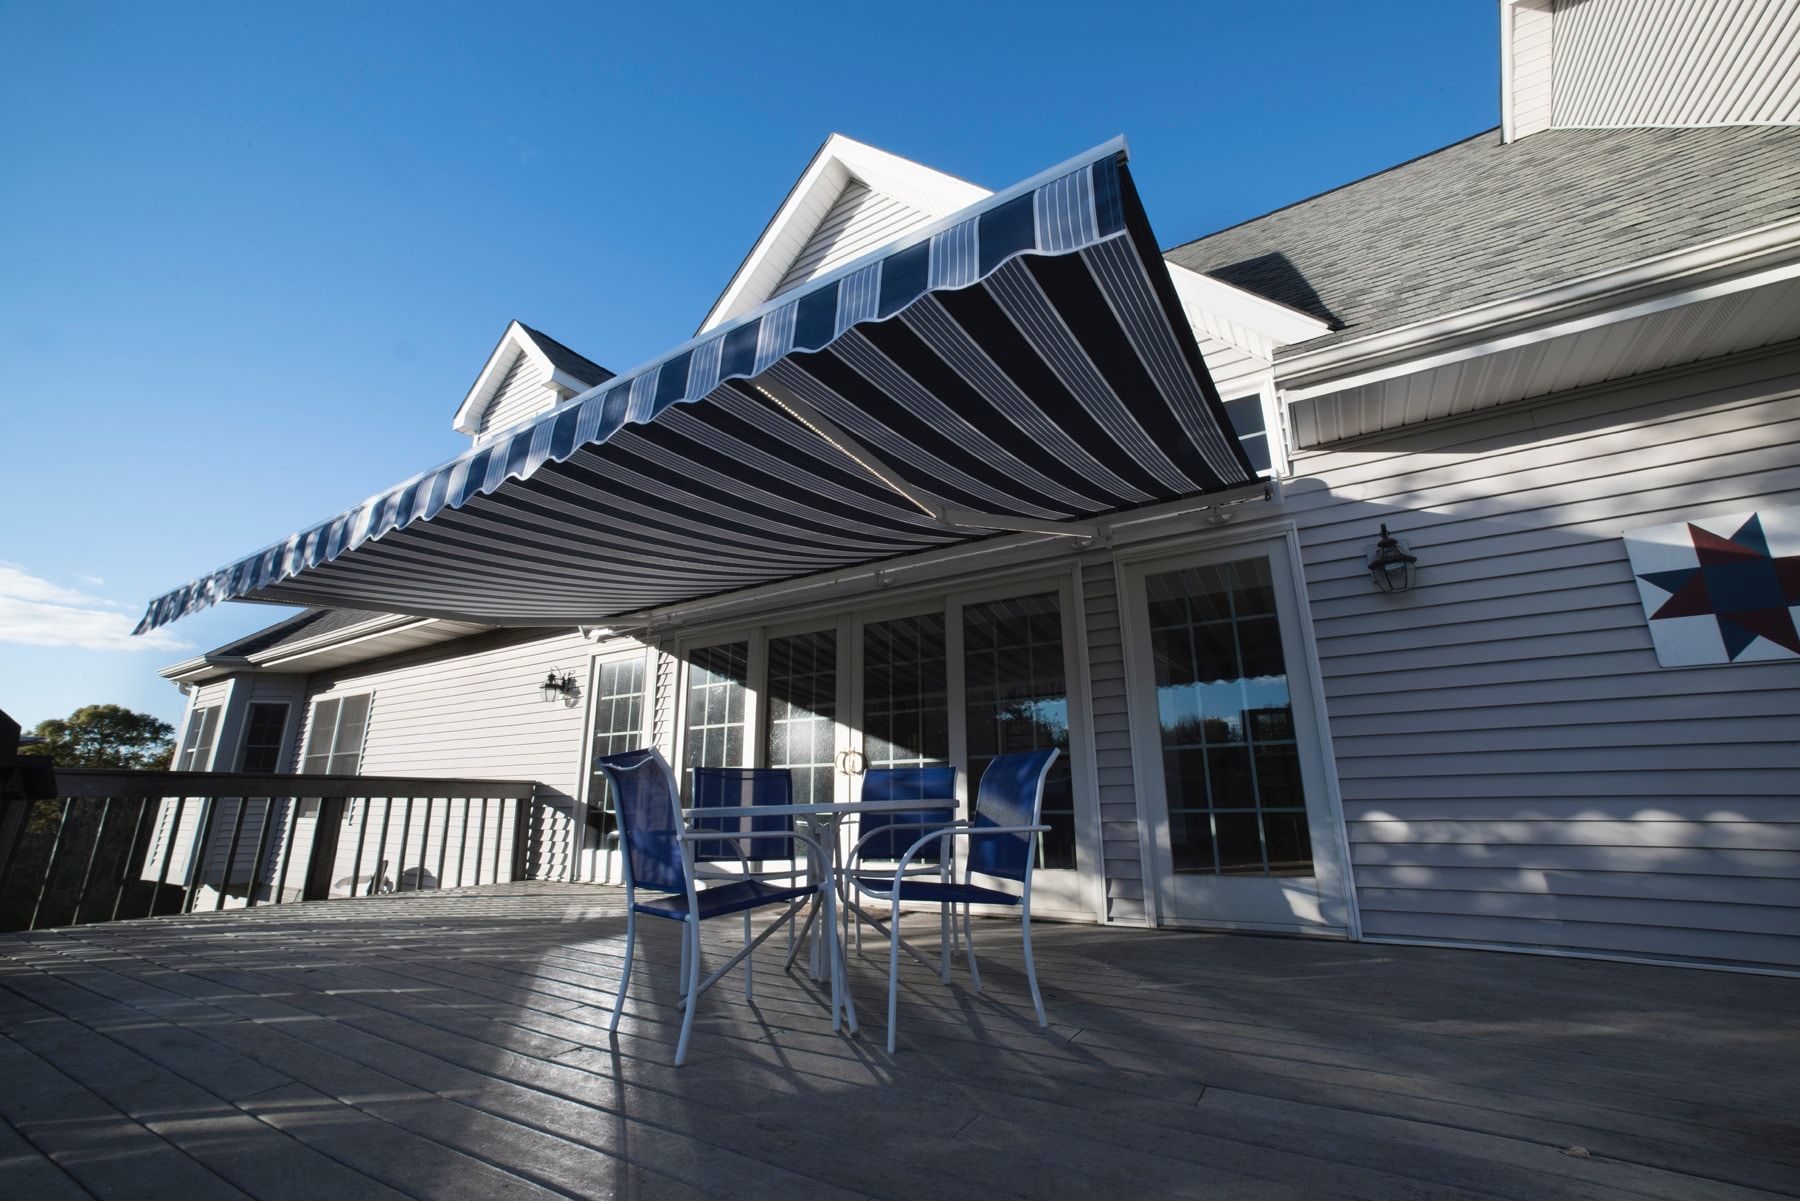 Retractable awnings for outdoor patio